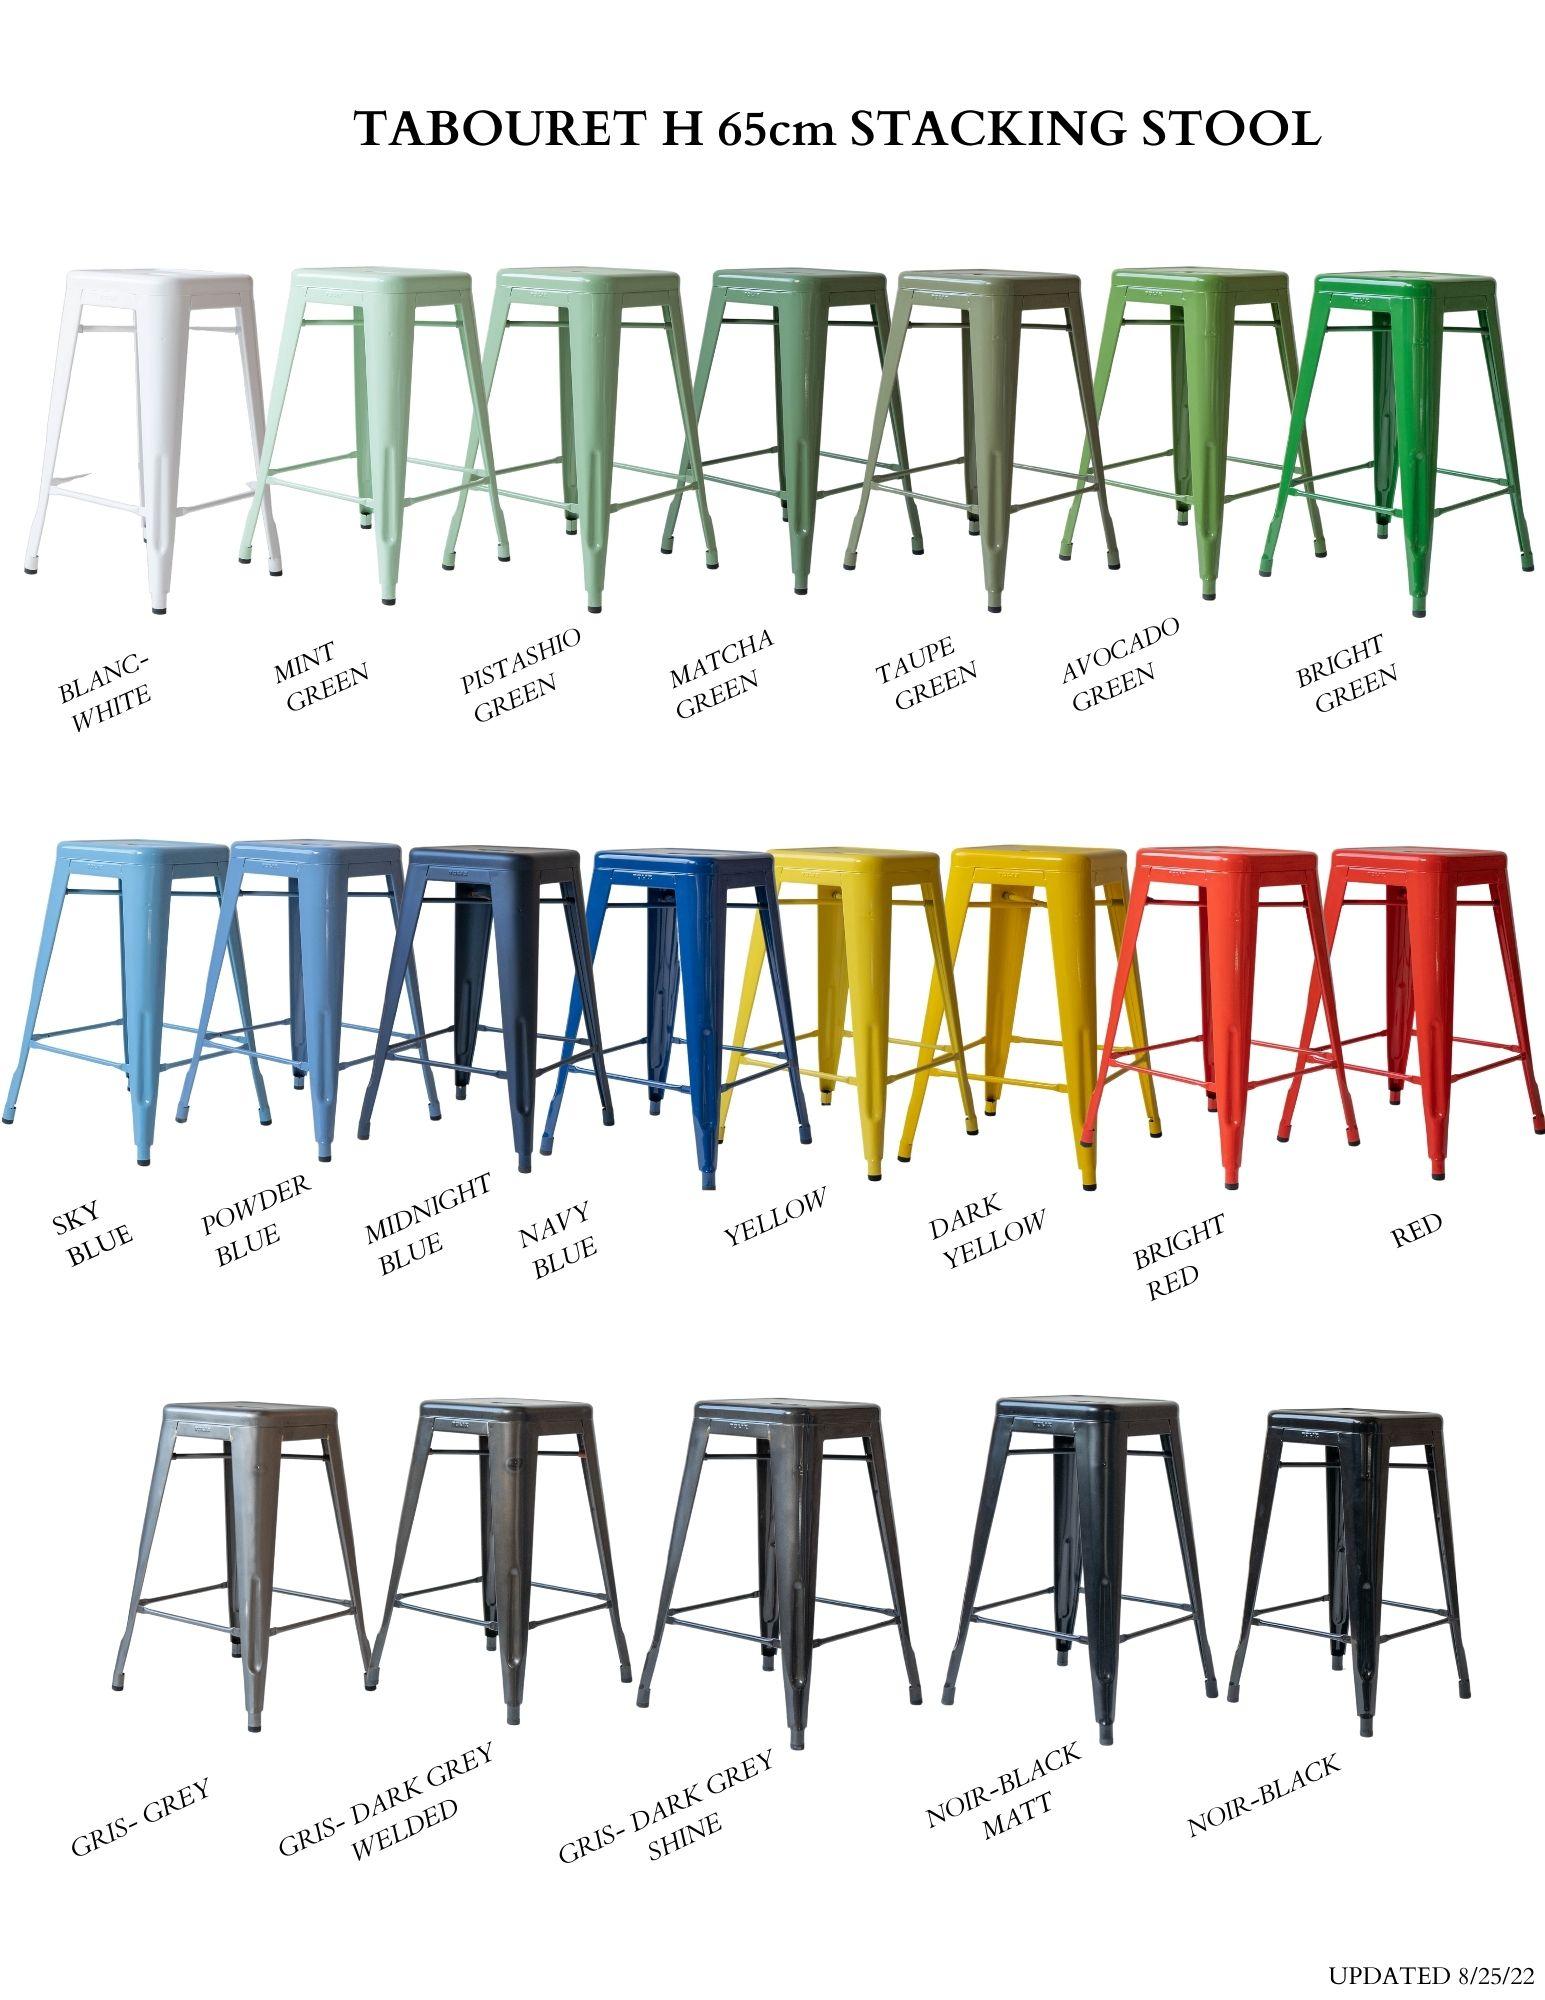 Hand-Crafted Genuine Tolix Stacking Stools 100's Showroom Samples to Choose from Most Colors